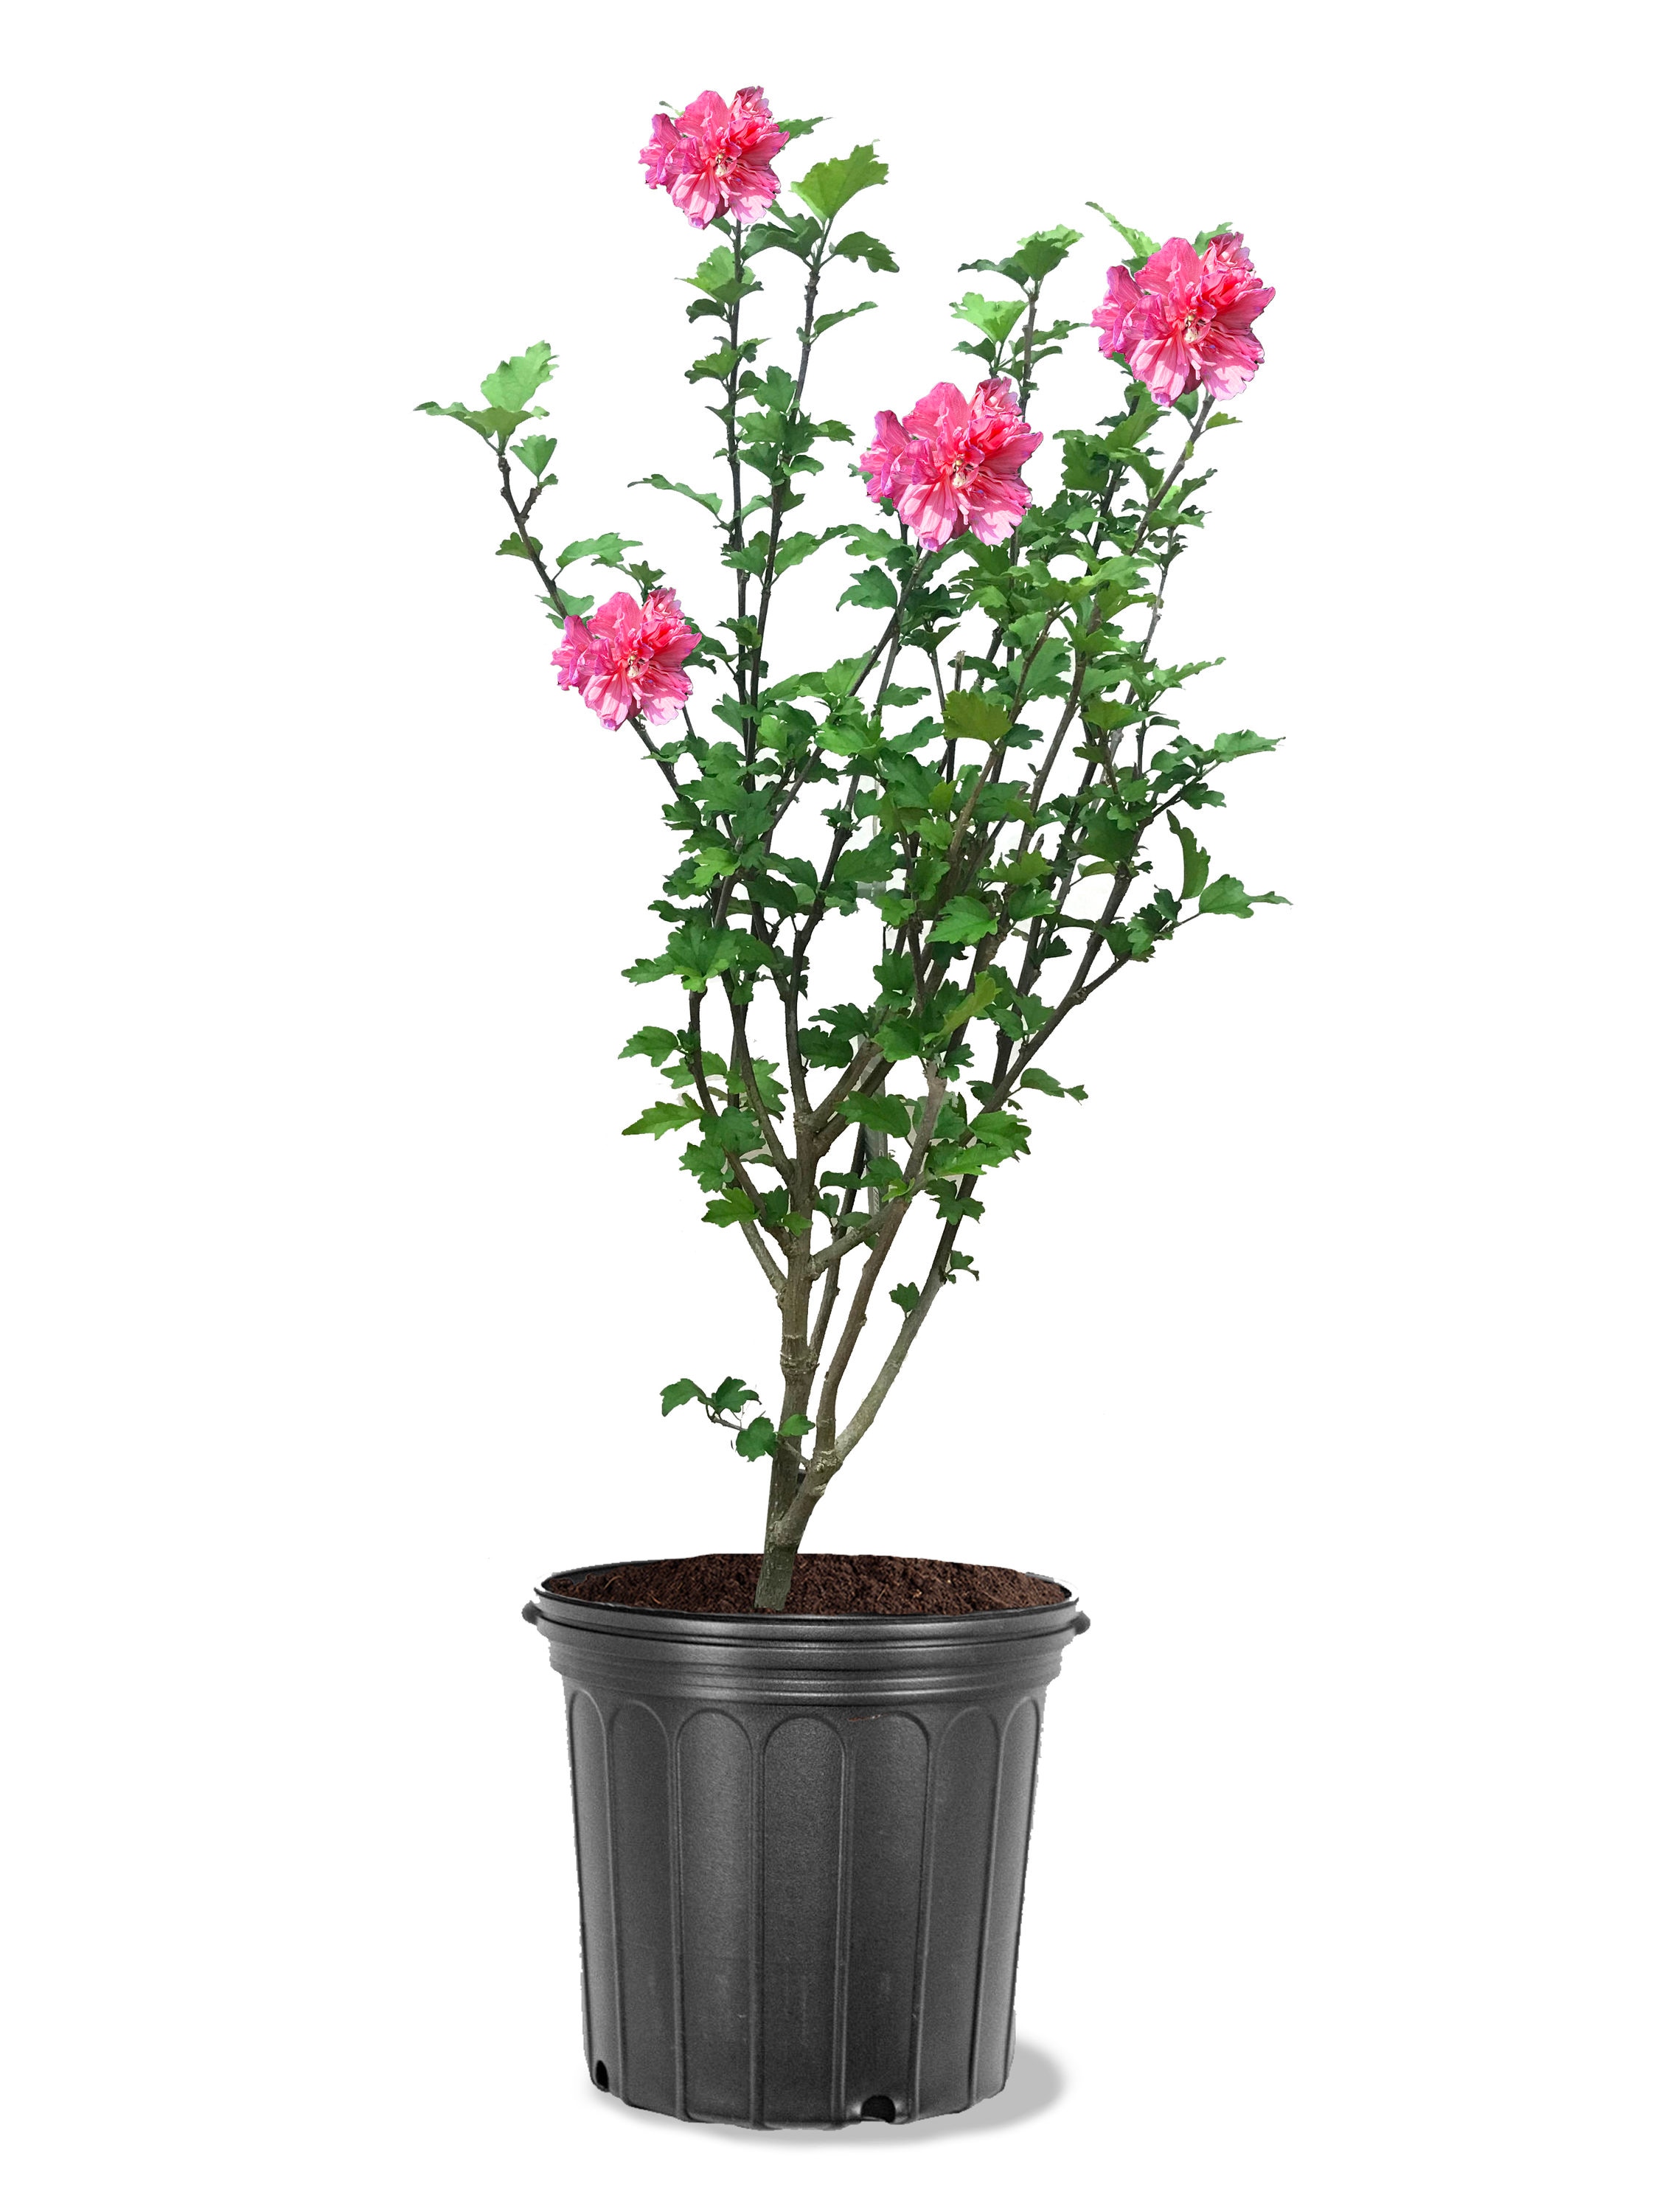 Pink Chiffon® Hibiscus 'Rose of Sharon' - 3 or 7 gallon container – Lots of  Plants